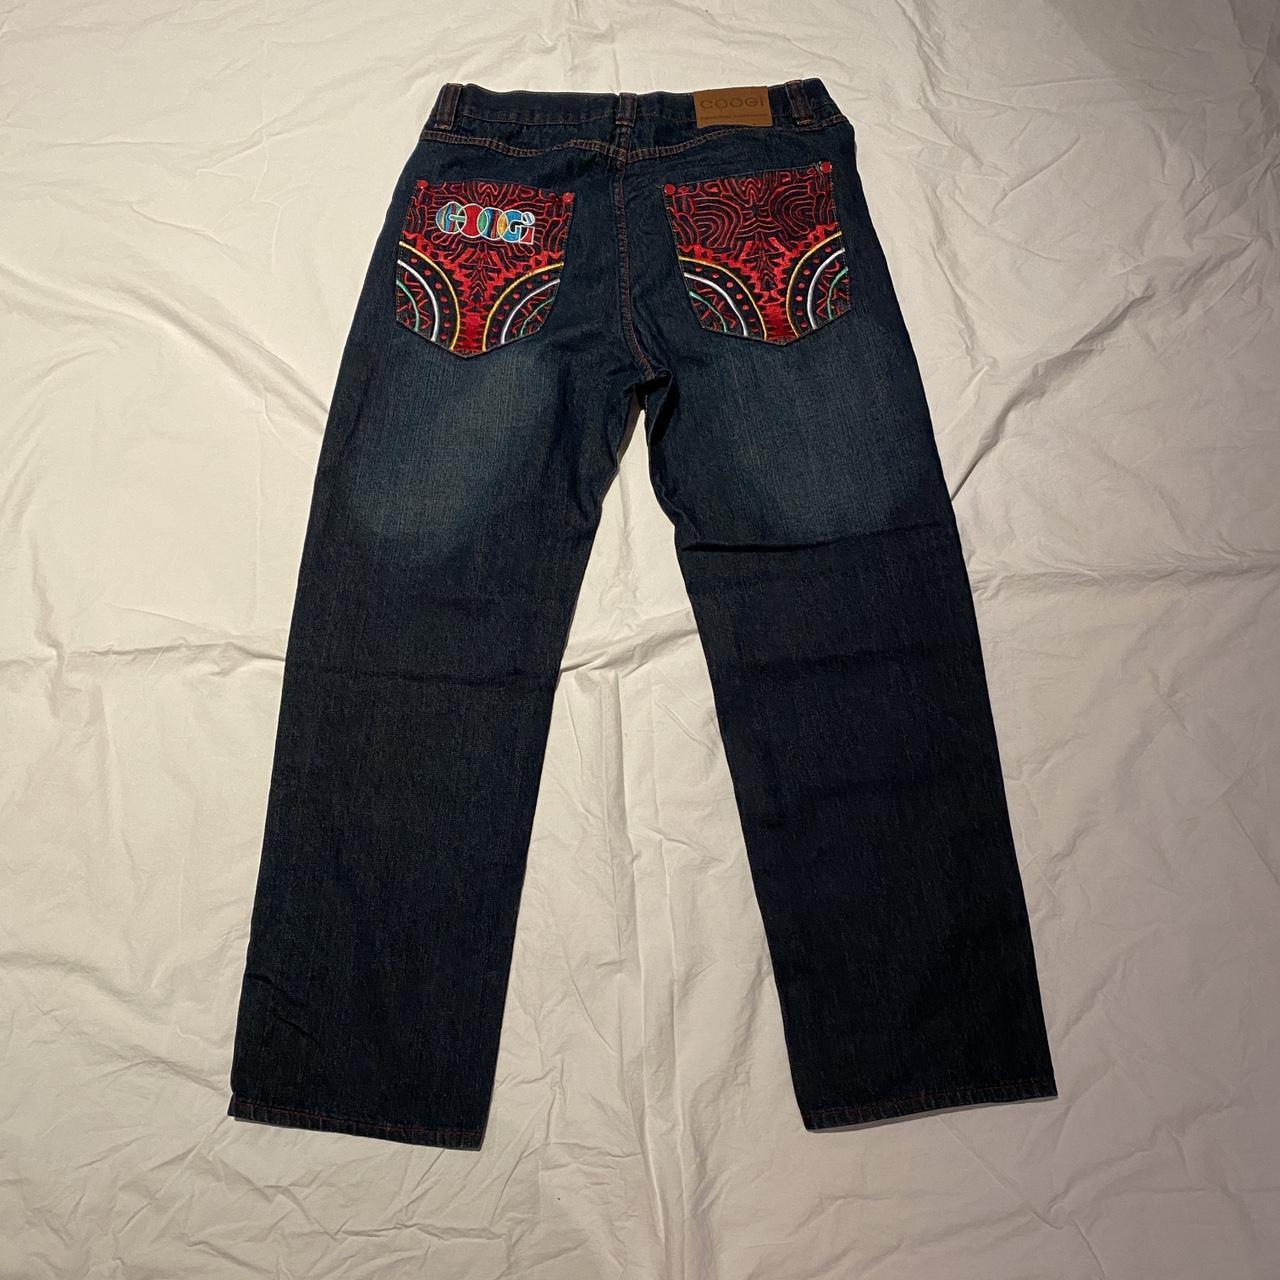 Coogi Men's Blue and Red Jeans